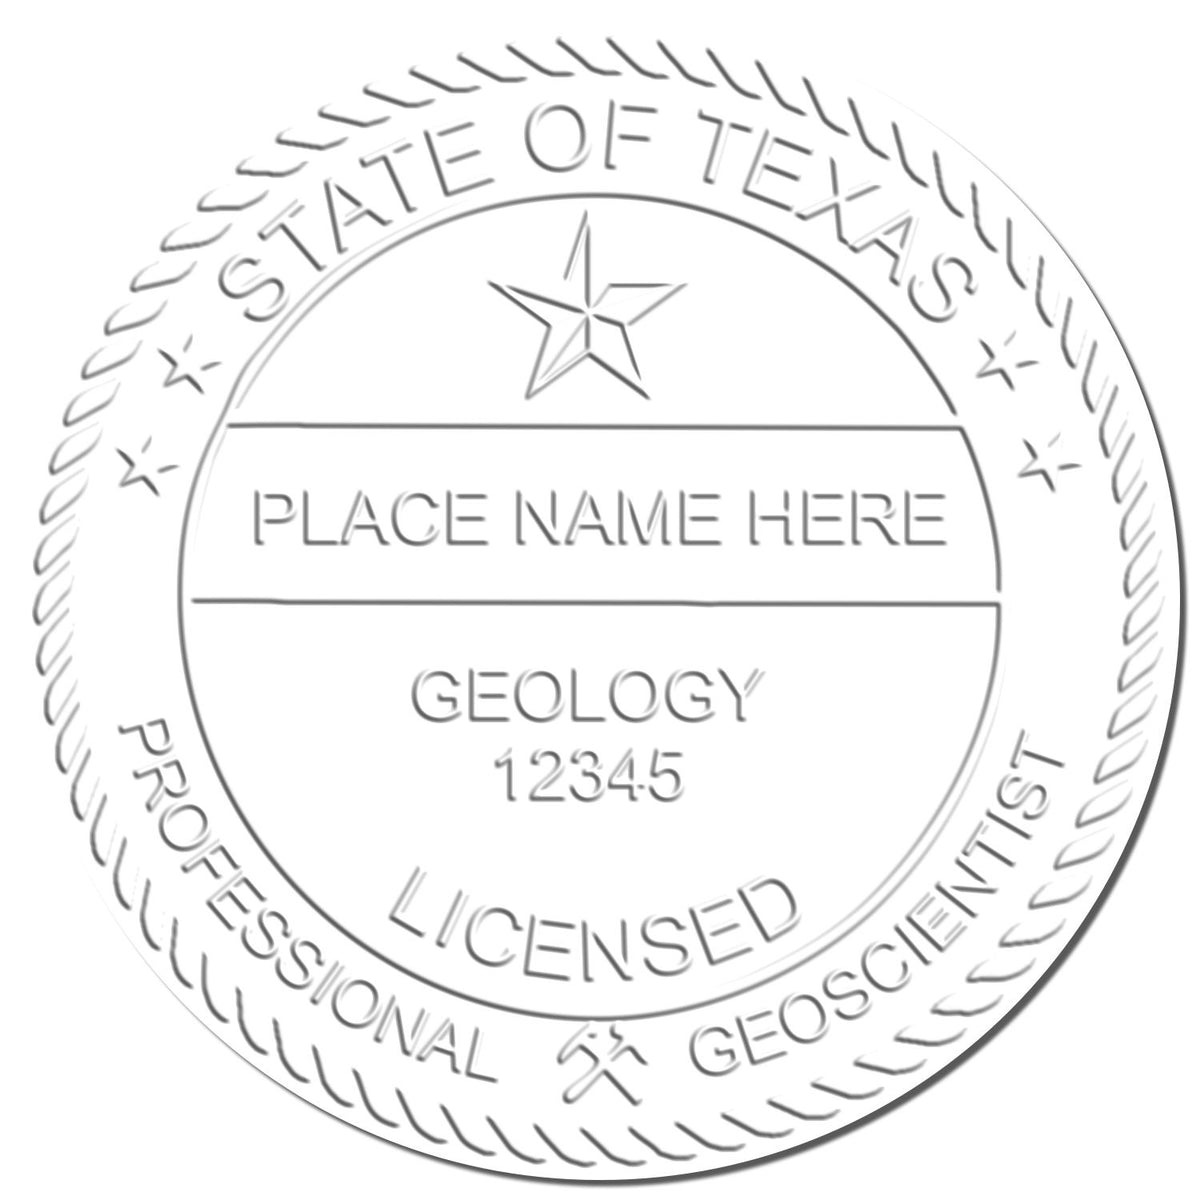 A stamped imprint of the Gift Texas Geologist Seal in this stylish lifestyle photo, setting the tone for a unique and personalized product.